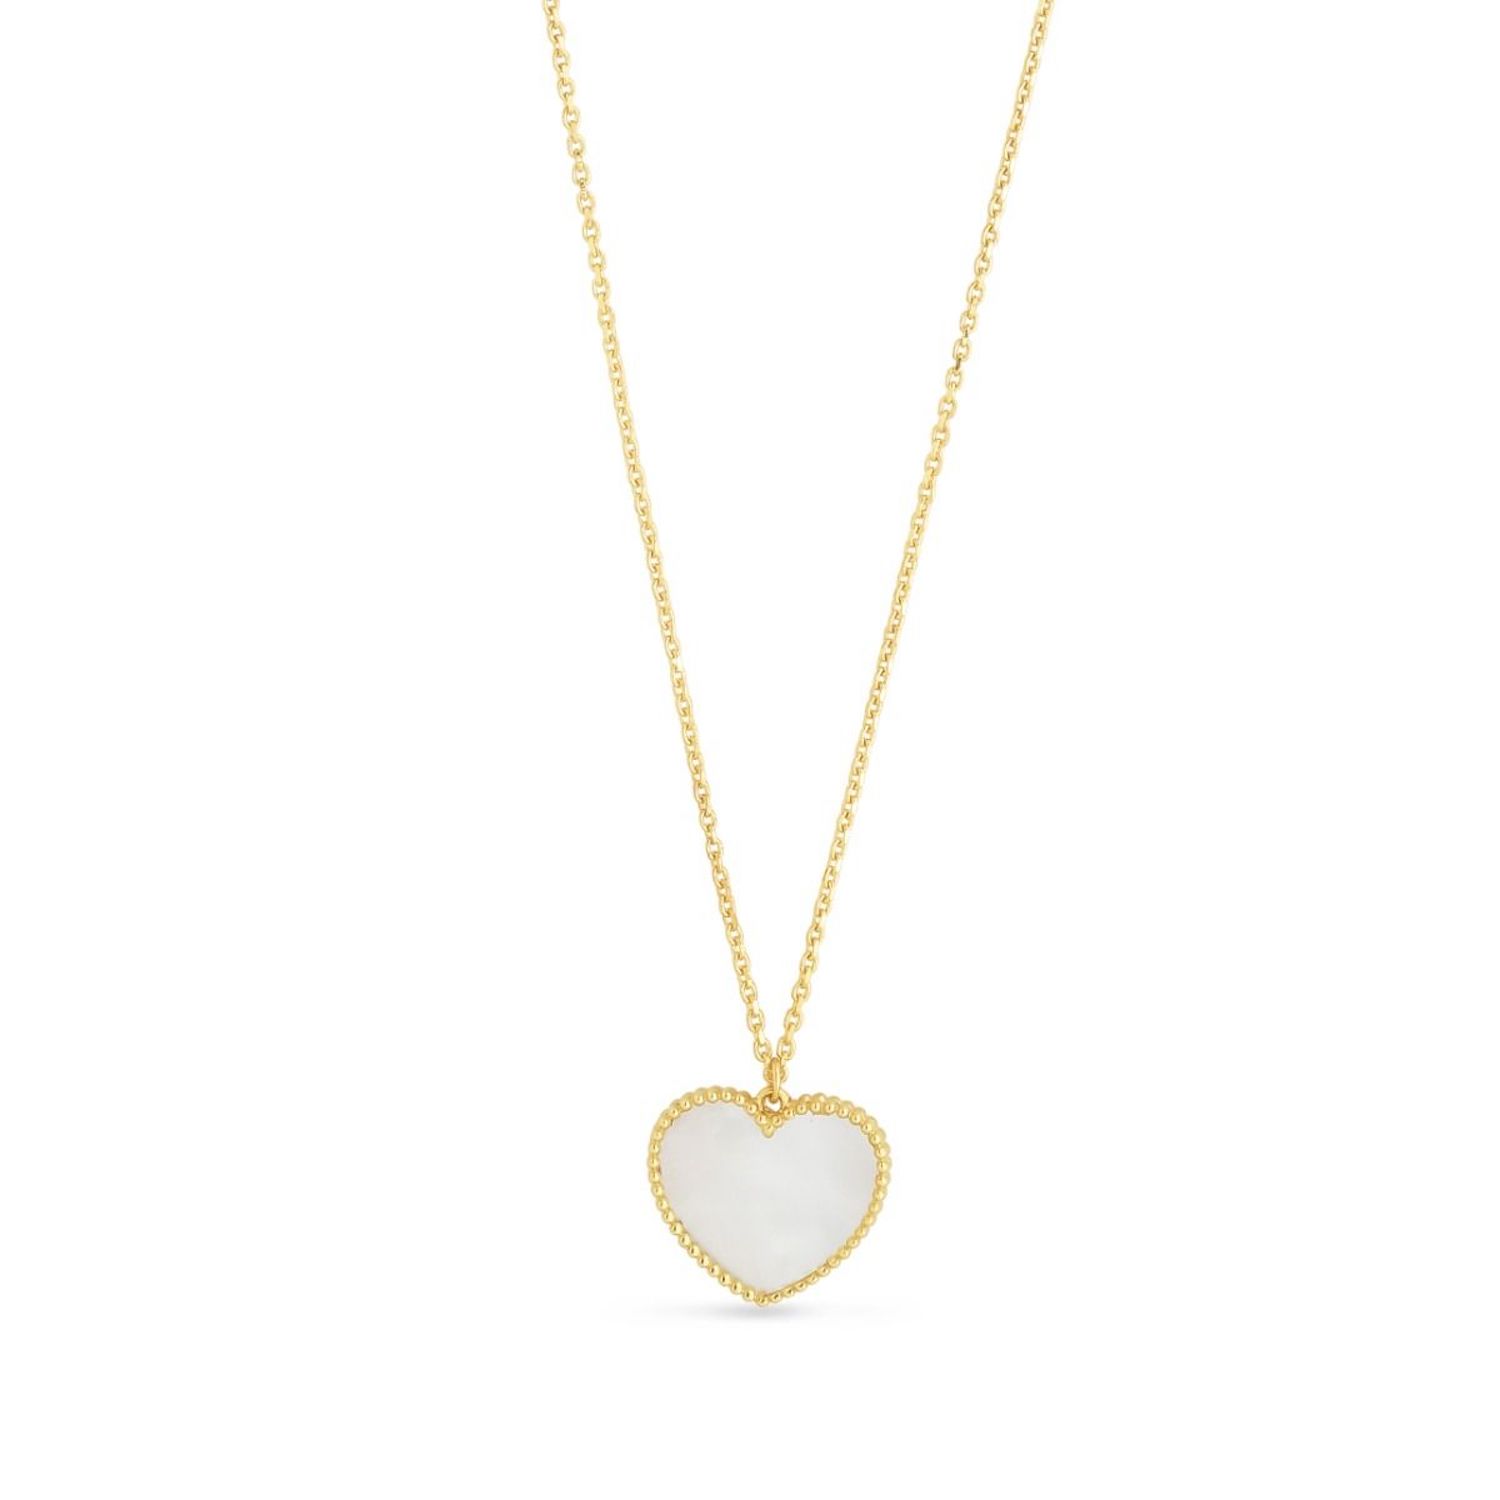 14K Yellow Gold Mother Of Pearl Heart Pendant Necklace 17"-18" Adjustable